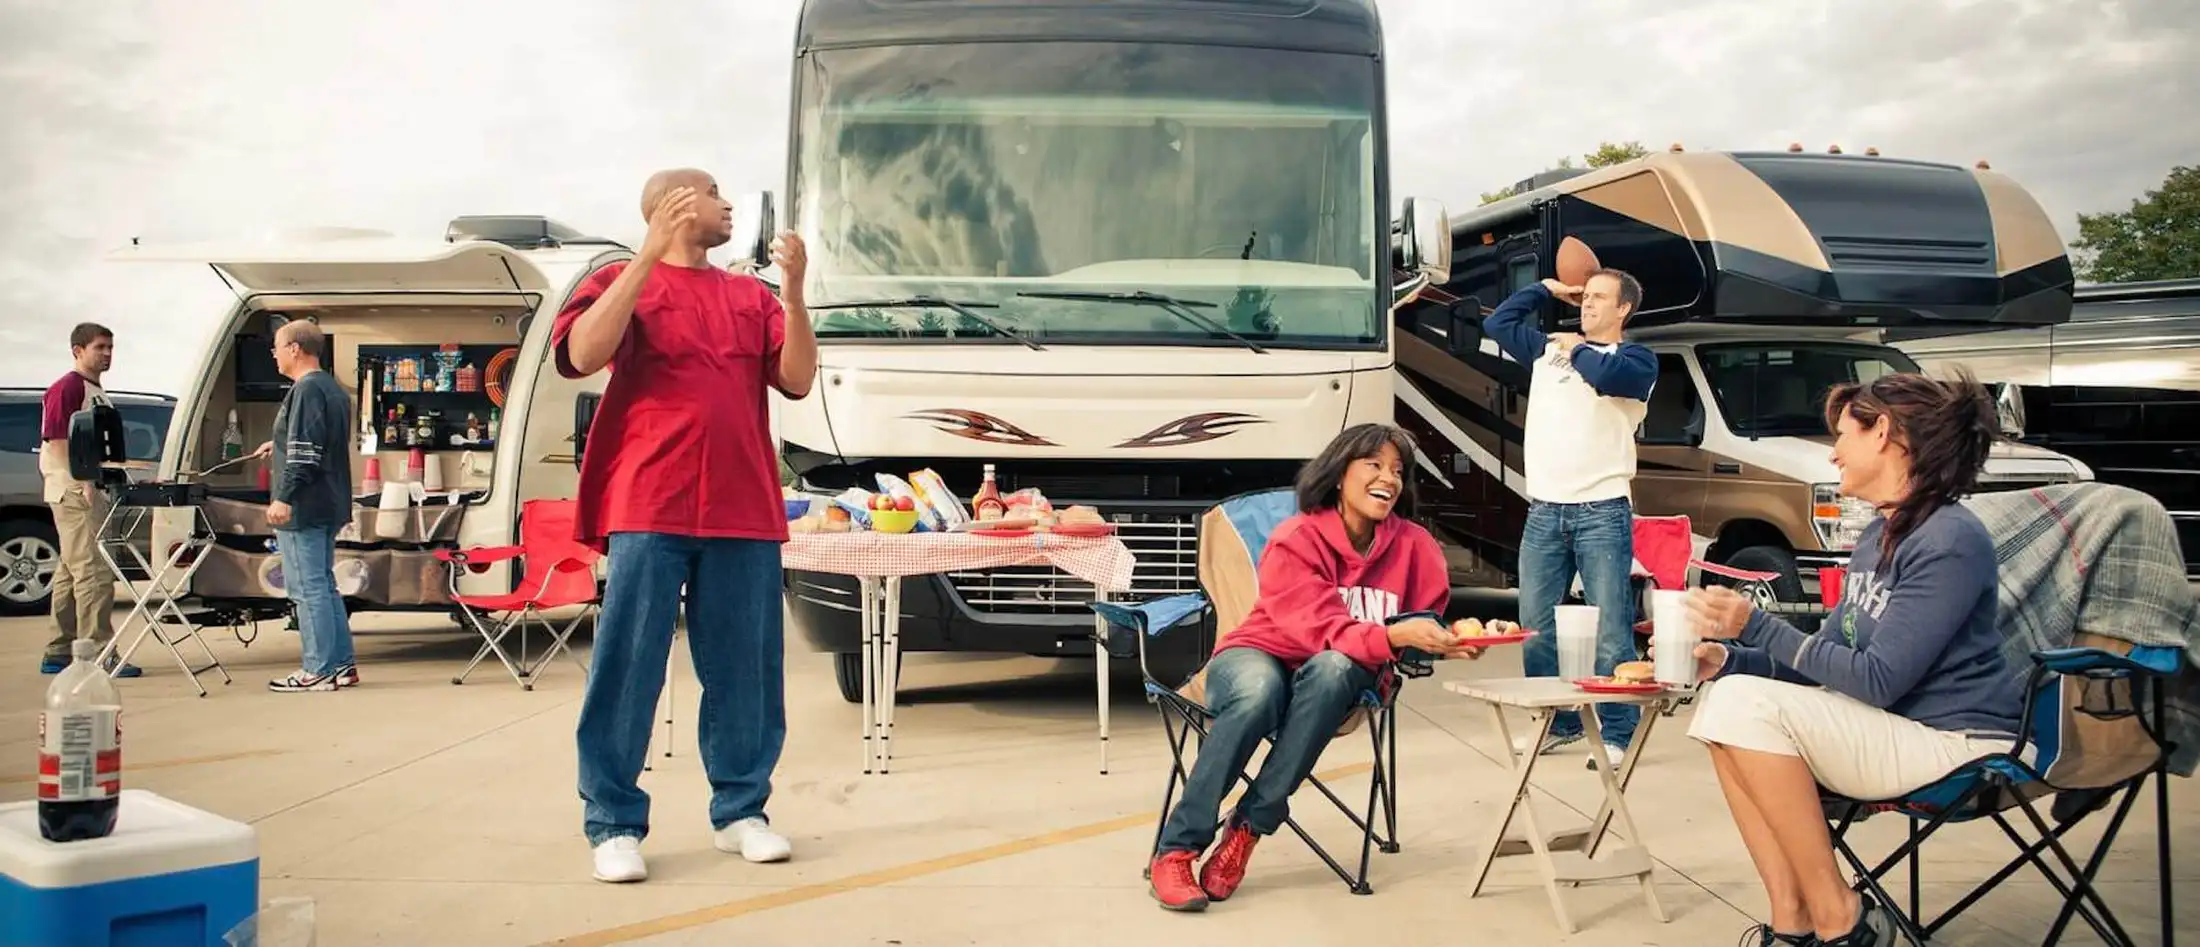 College towns with great RV camping and tailgating